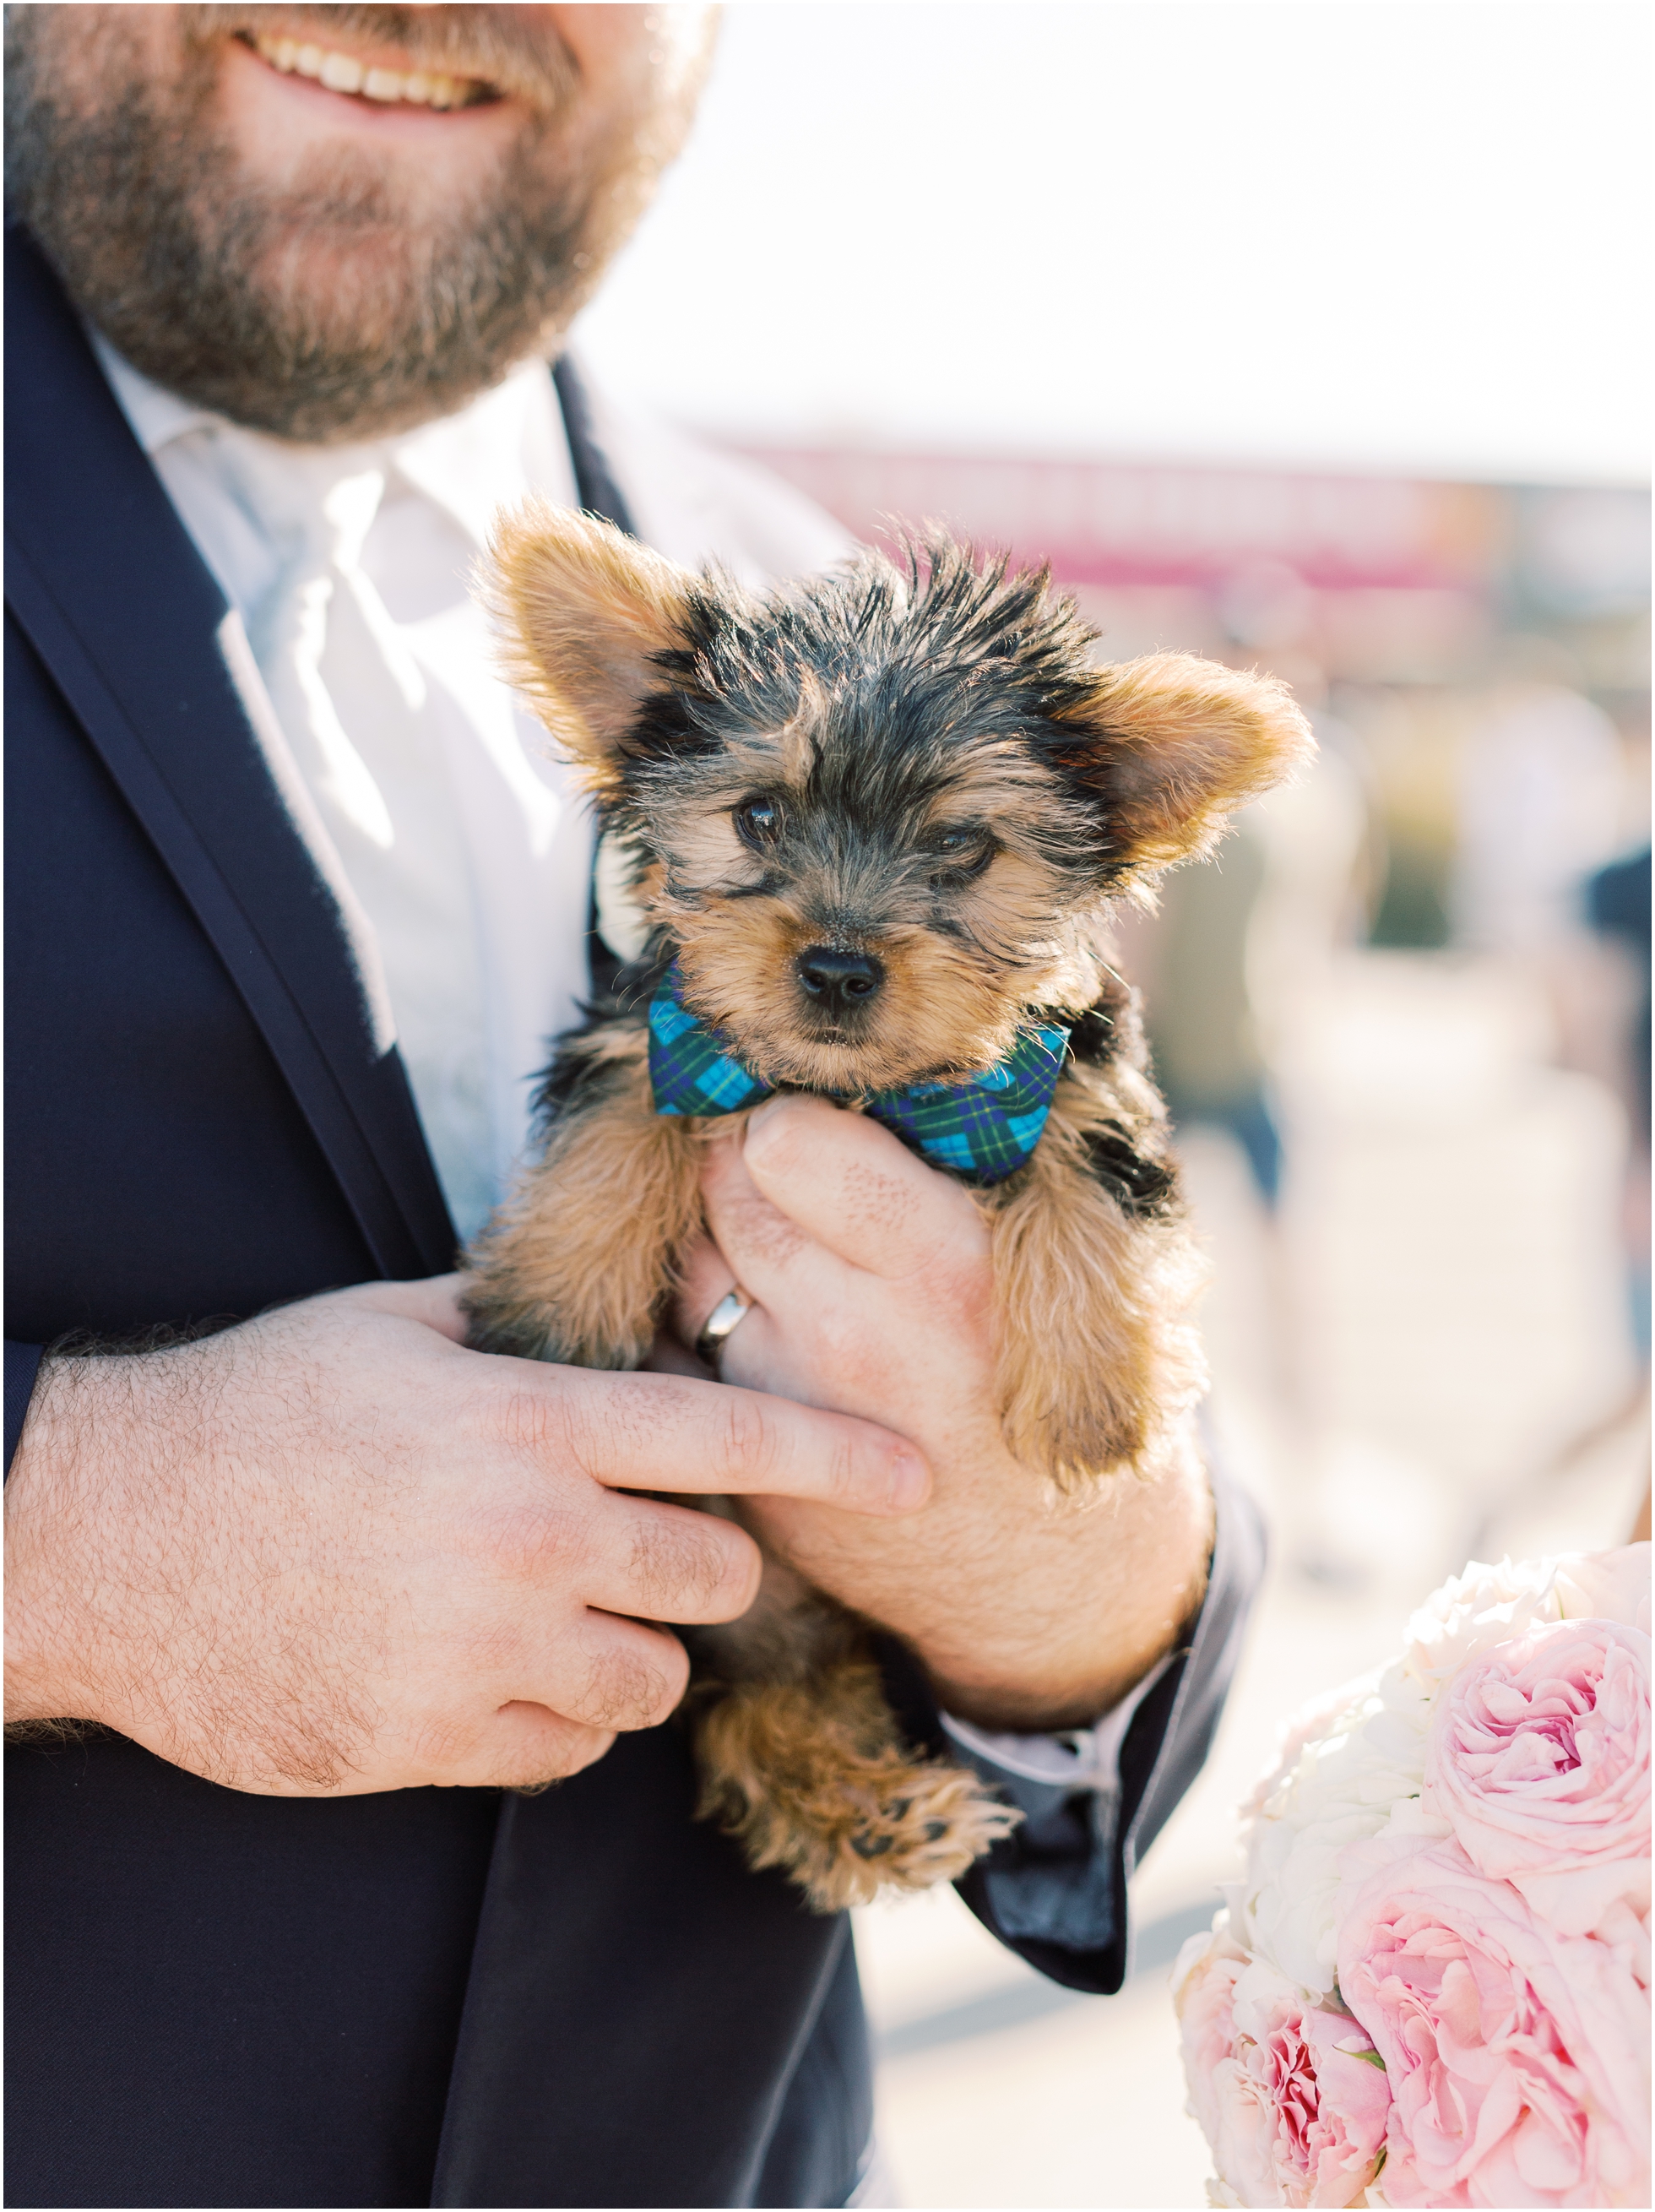 Planning for An Engagement Session with Your Dog